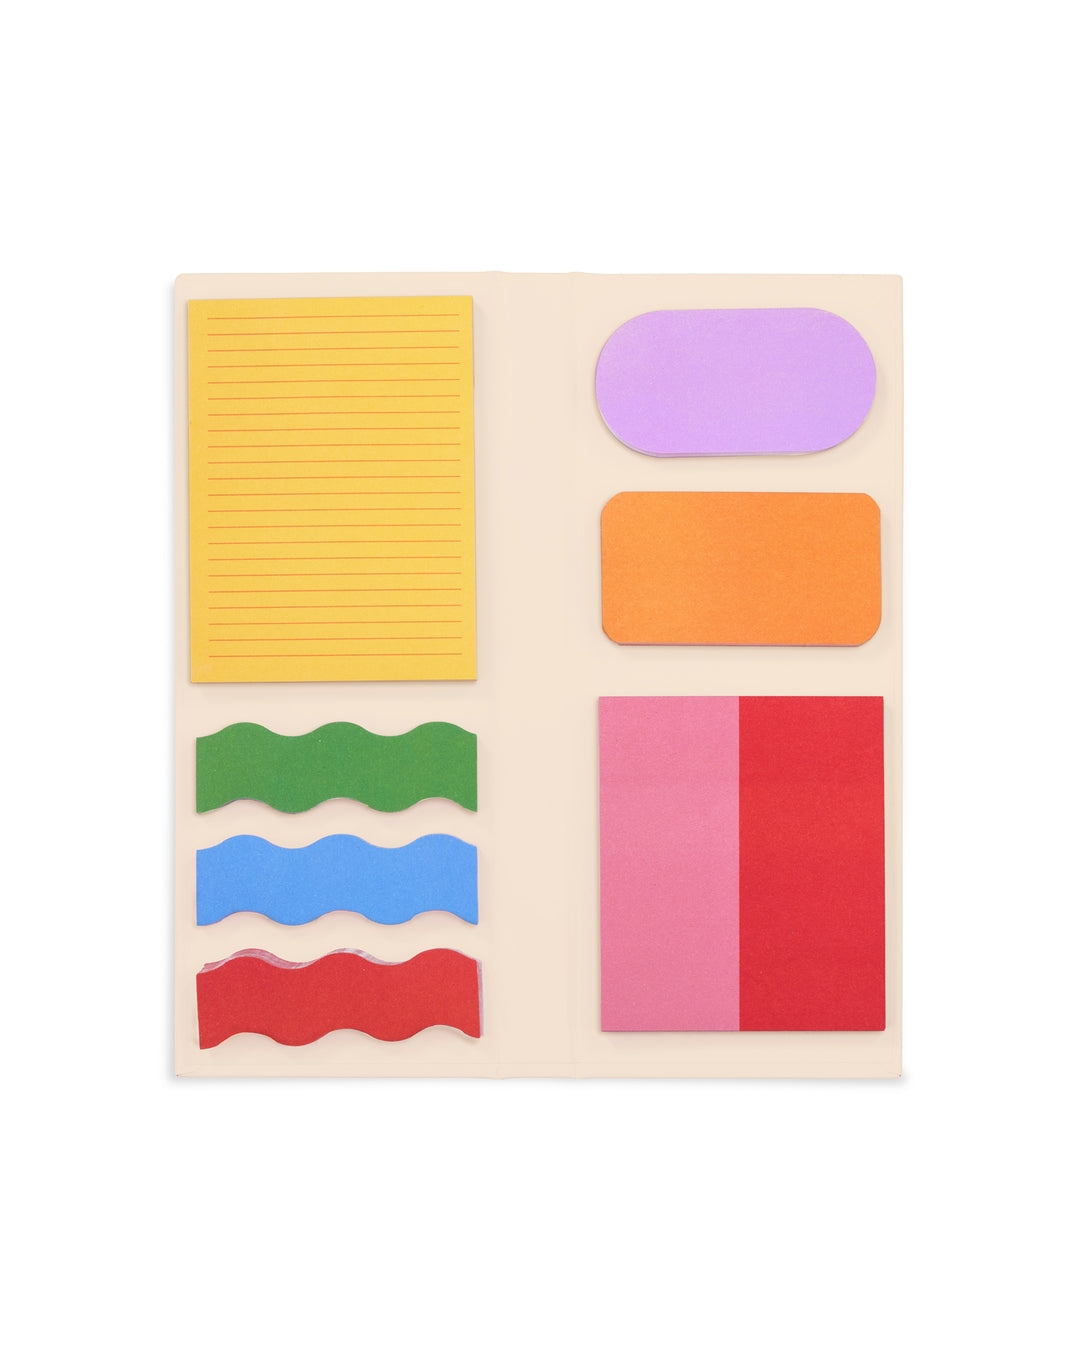 Take Note! Sticky Note Set - Colorblock [PRE ORDER]